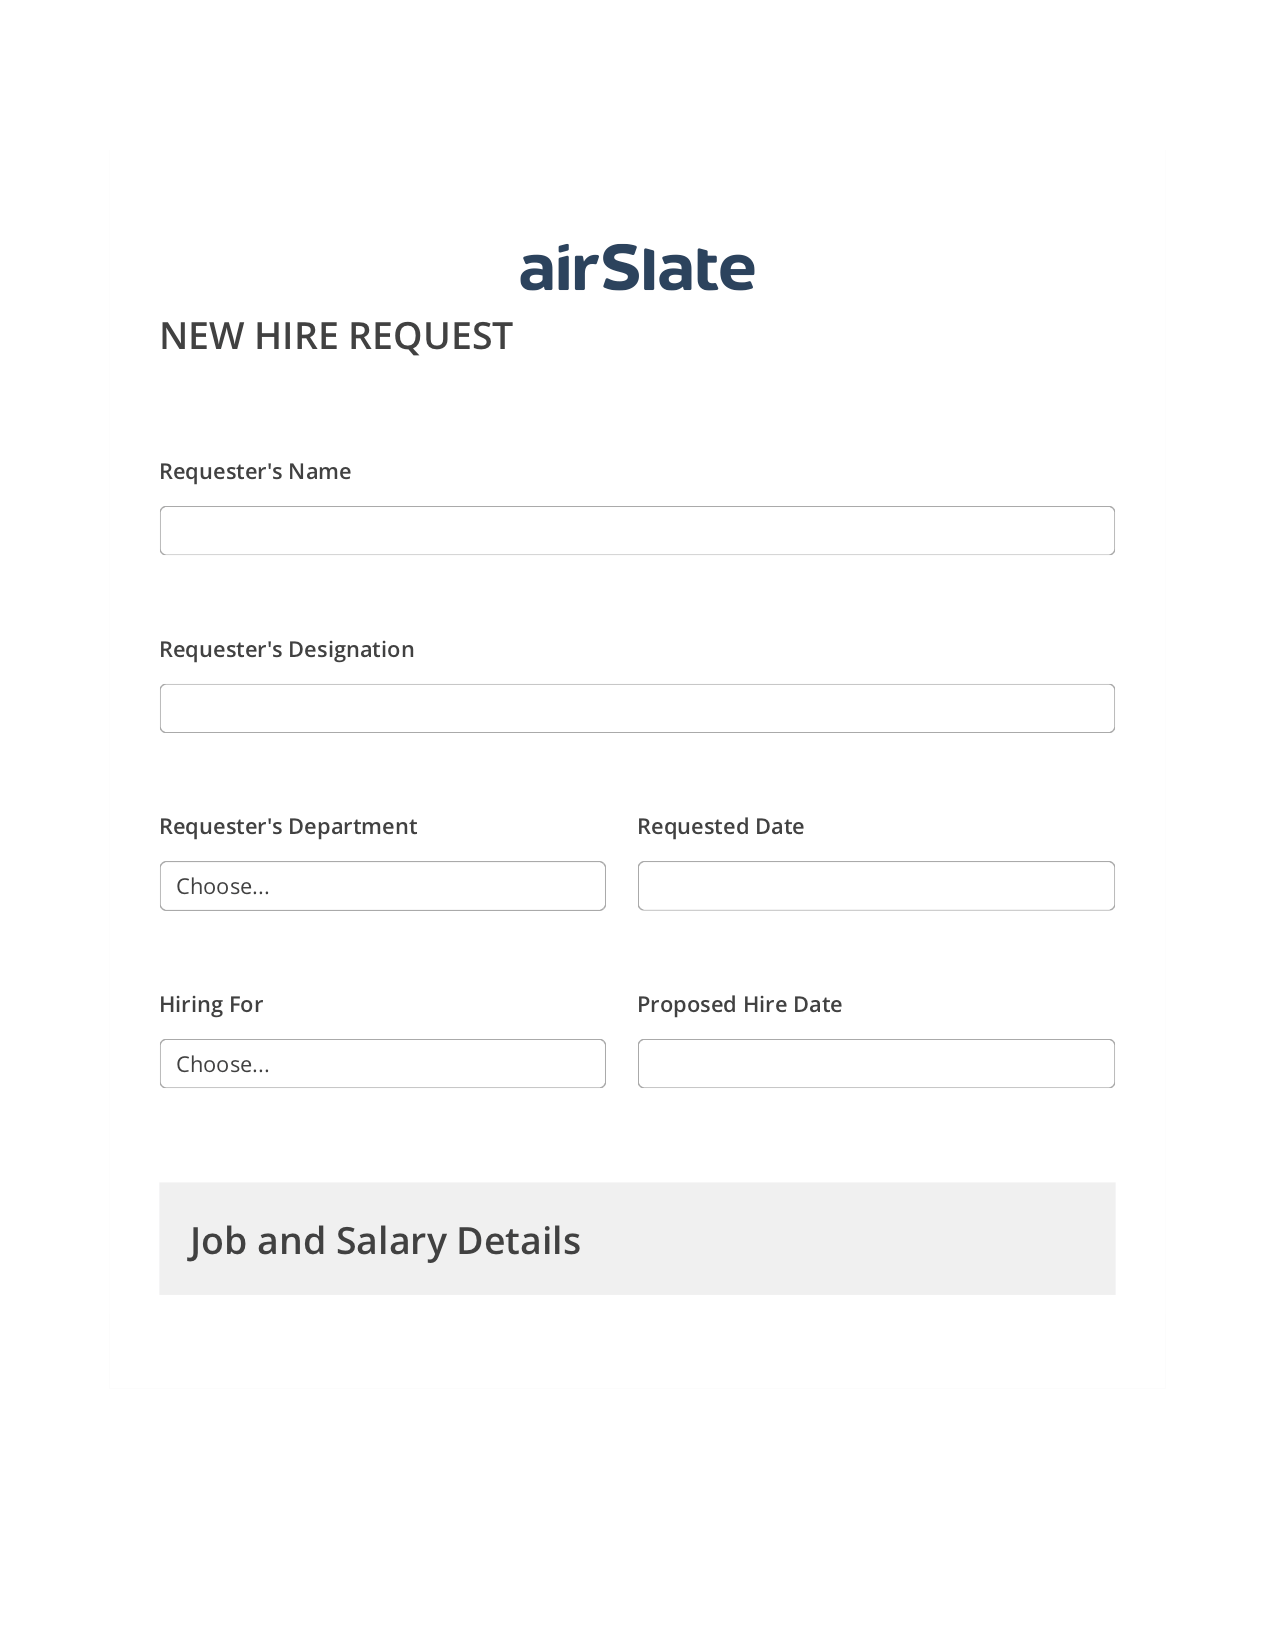 Hiring Request Workflow Pre-fill Dropdowns from CSV file Bot, Update MS Dynamics 365 Record Bot, Export to NetSuite Bot